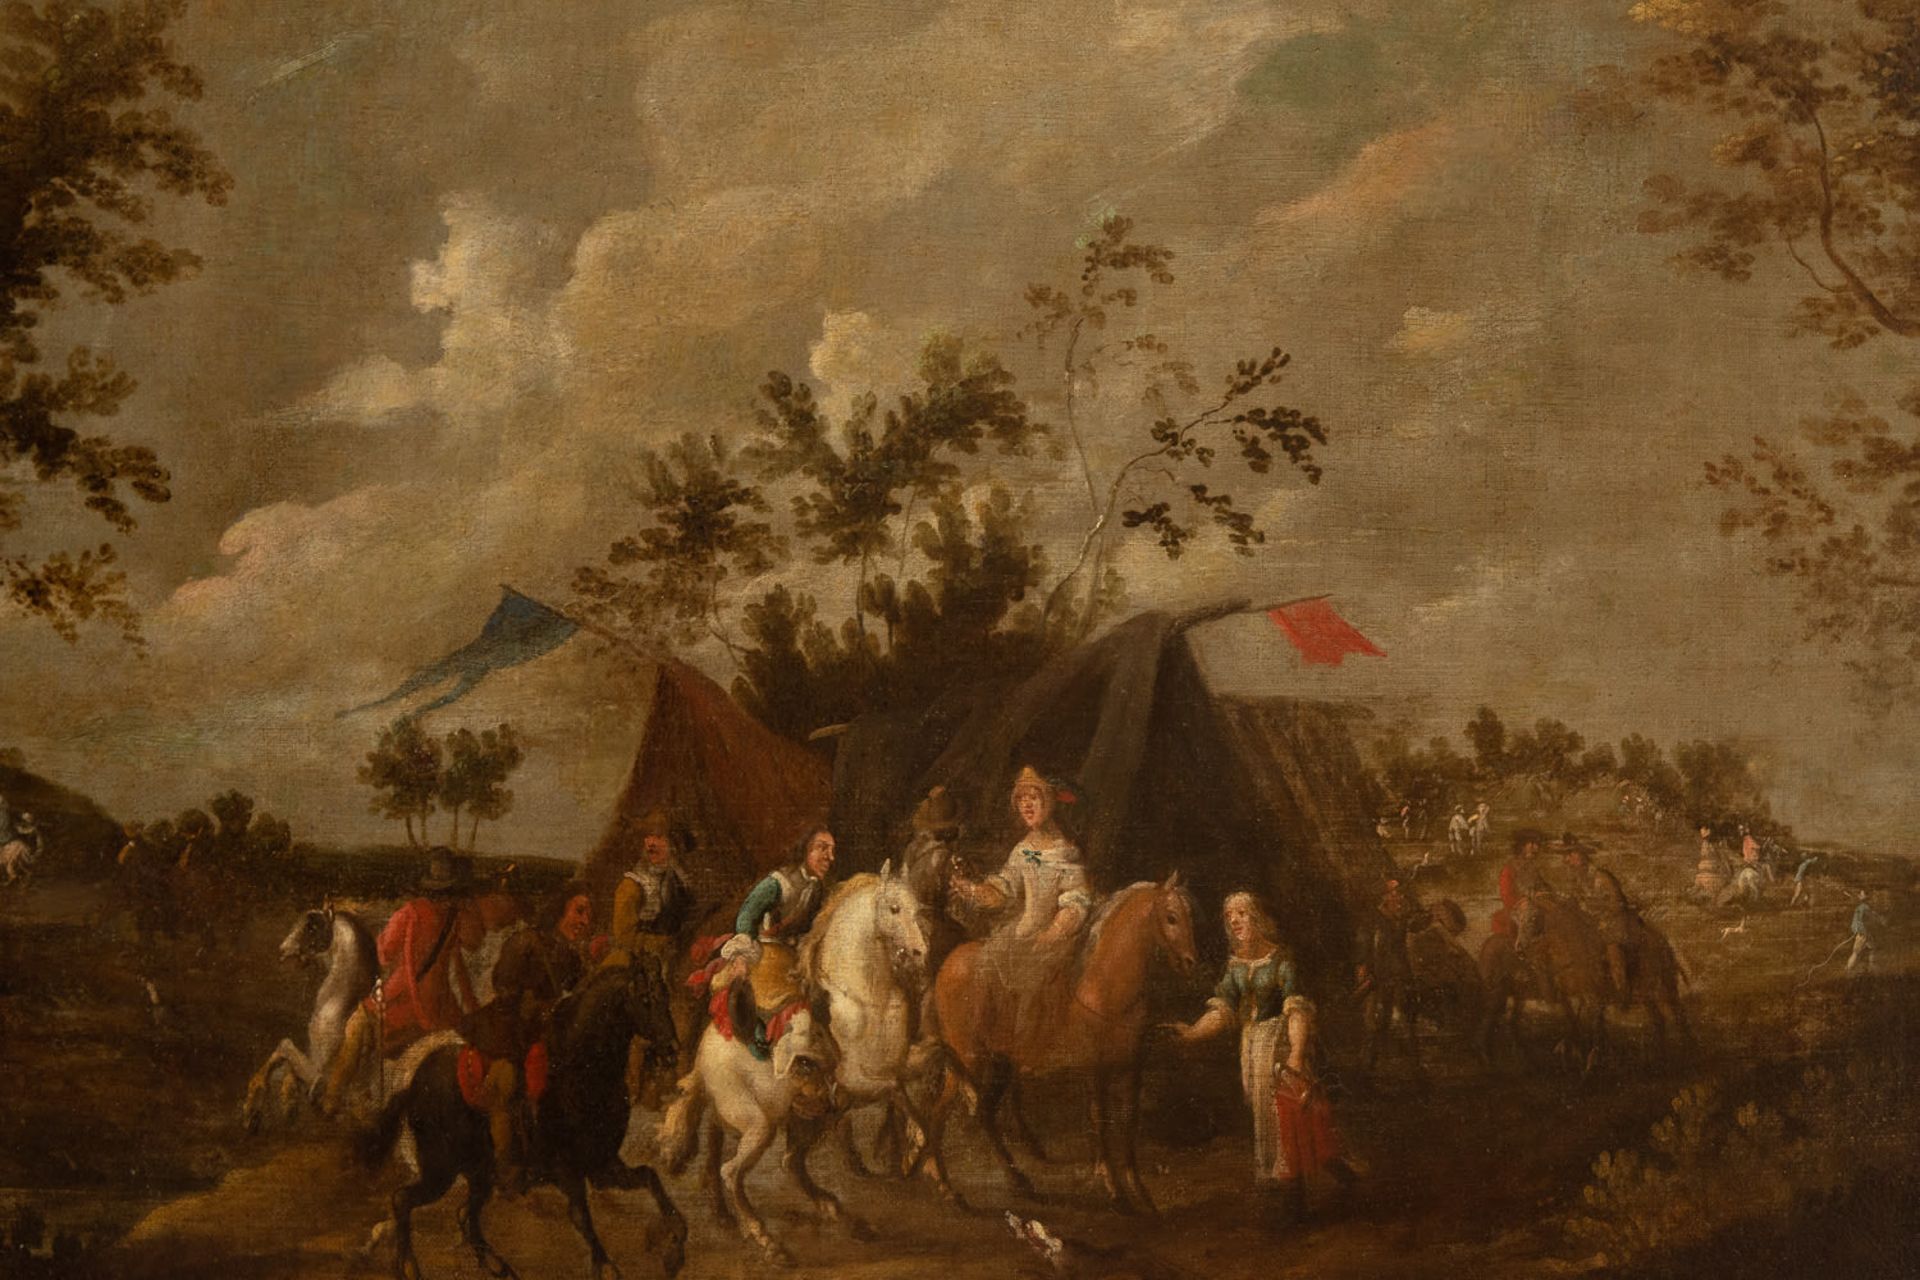 Cavalry scene, Dutch school from the second half of the 17th century - Image 4 of 12